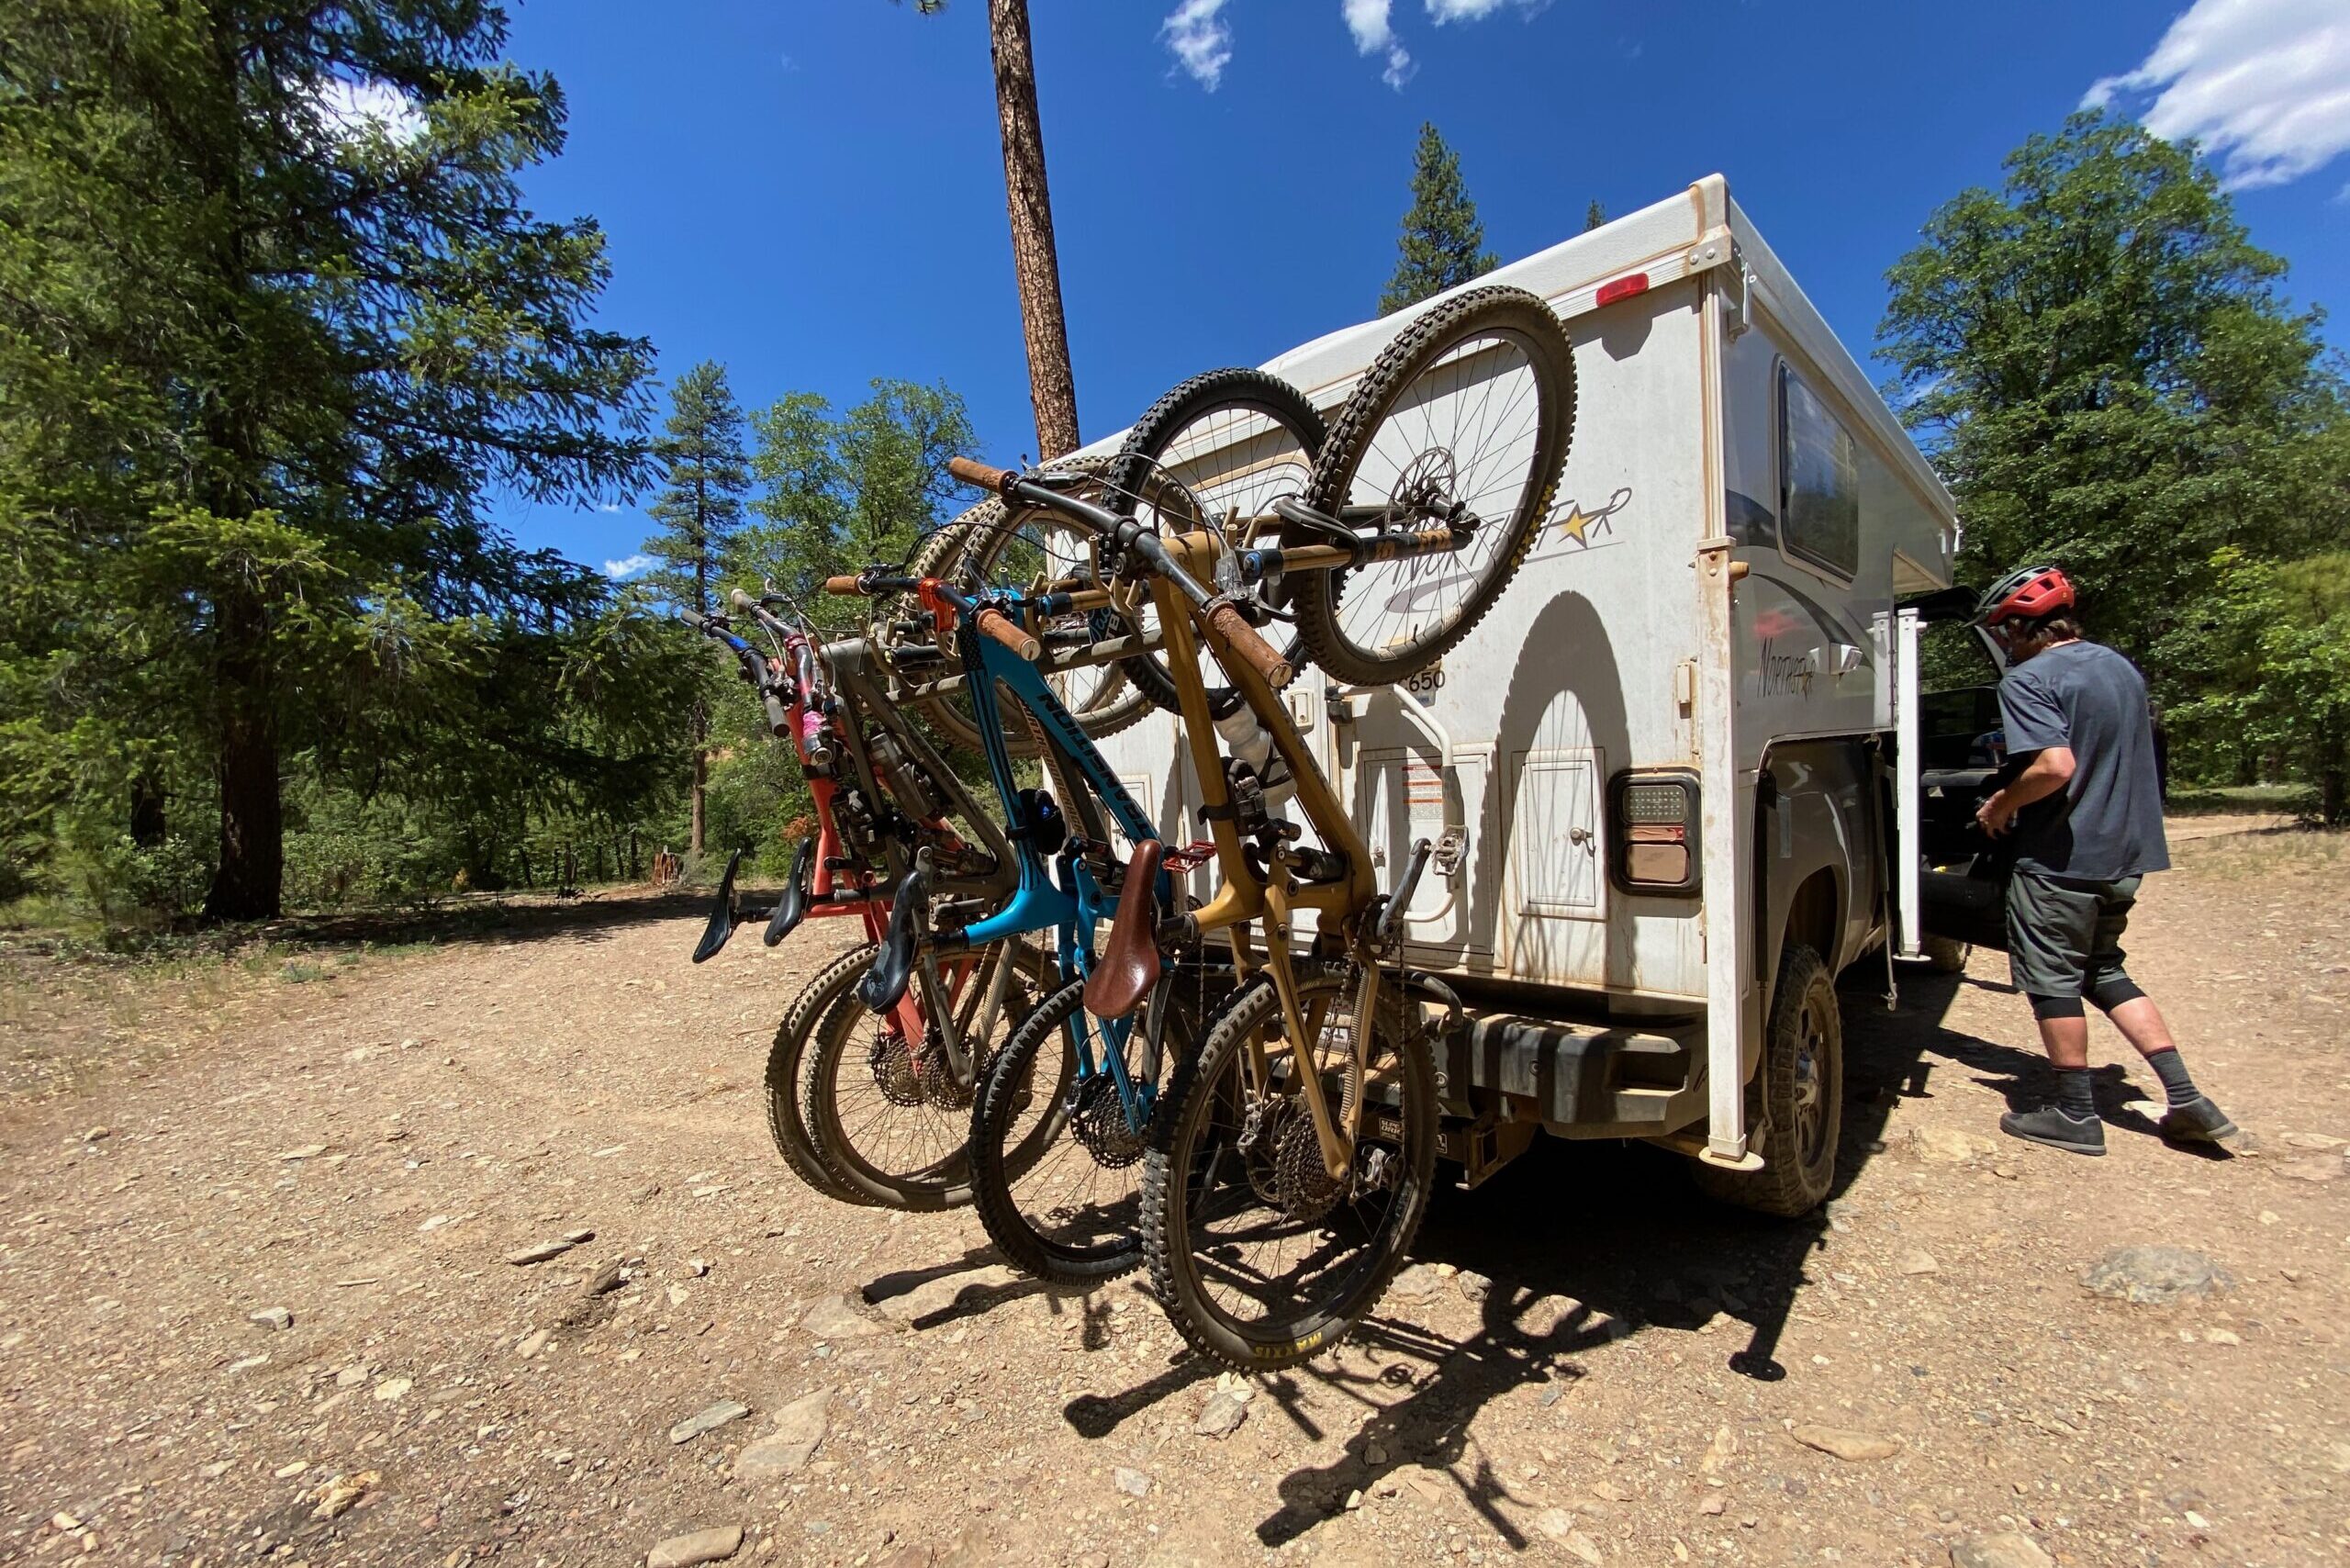 Loading up the North Shore Racks with several mountain bikes for more shuttle laps